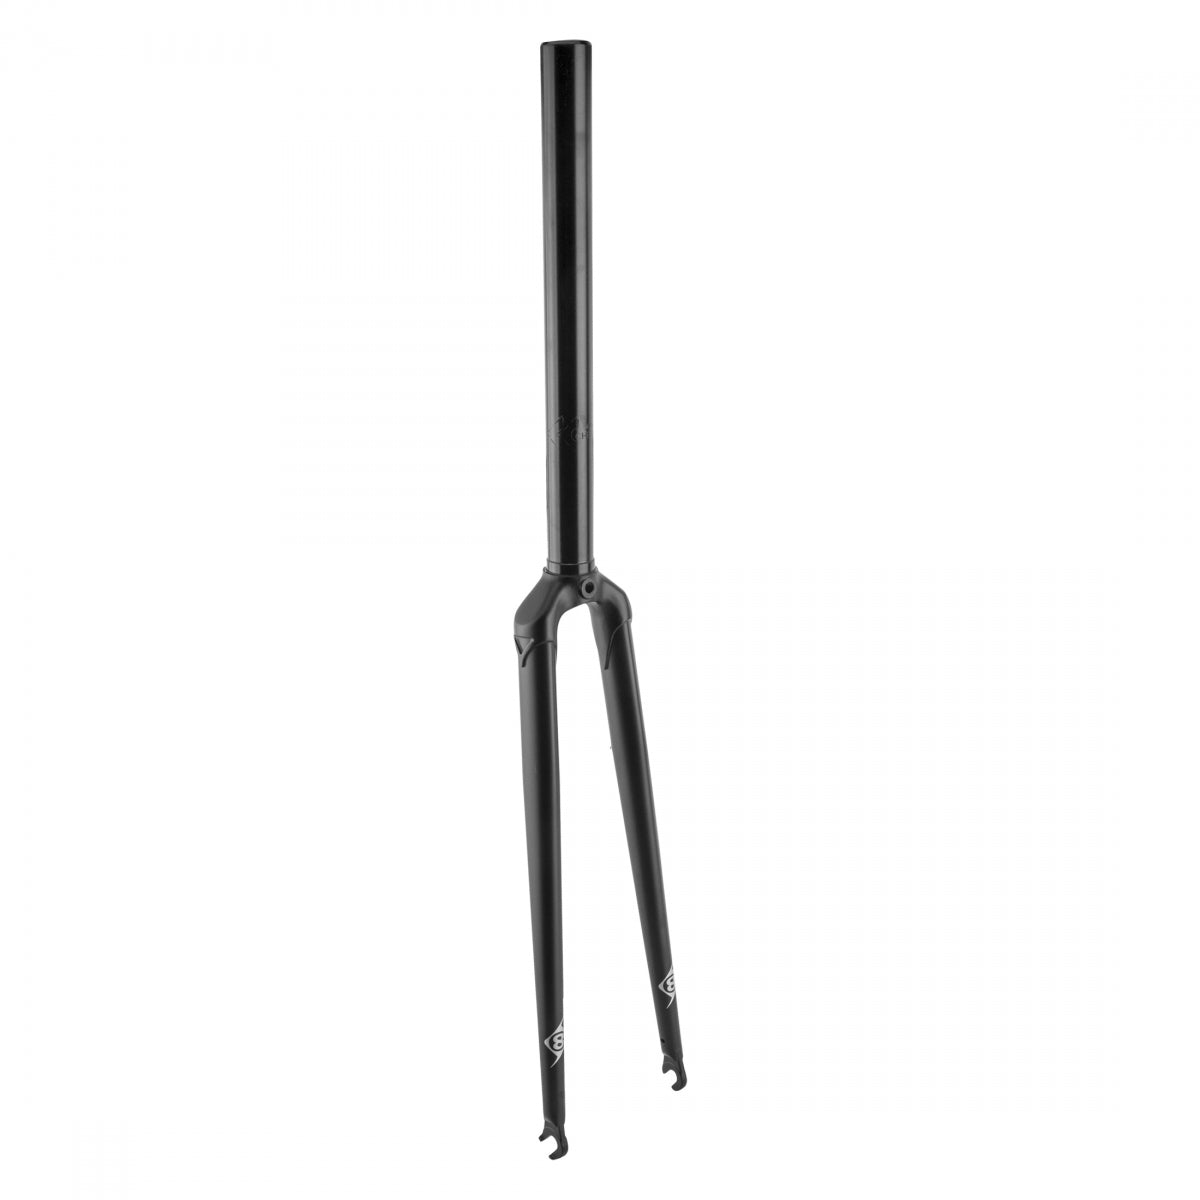 Origin8 Pro Pulsion Synergy 700c Road Fork, Alloy/Carbon, 1 1/8